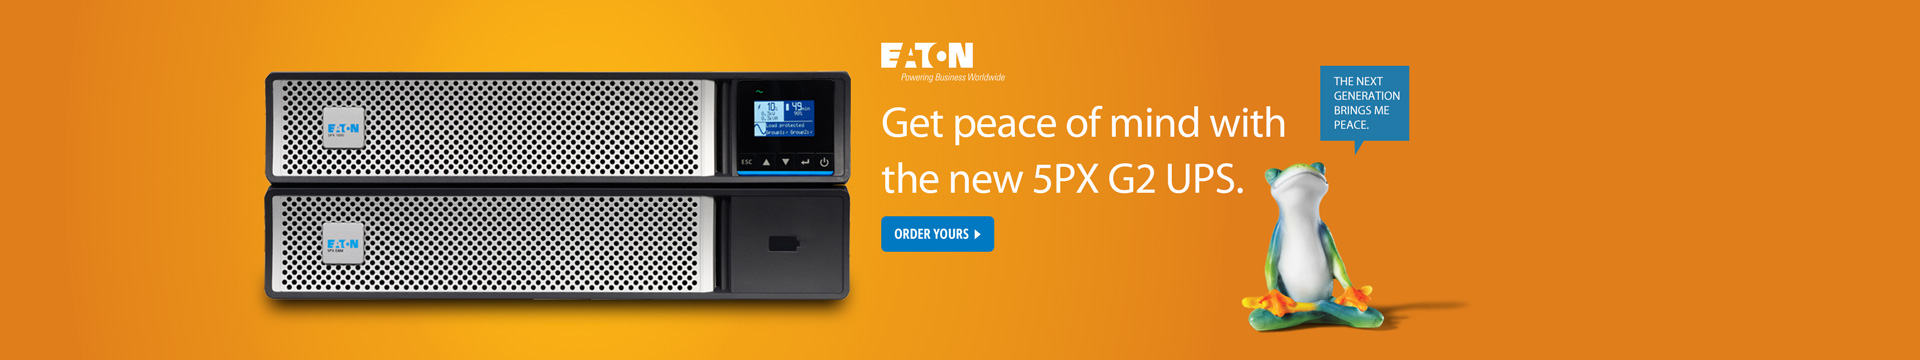 Get peace of mind with the new 5PX G2 UPS